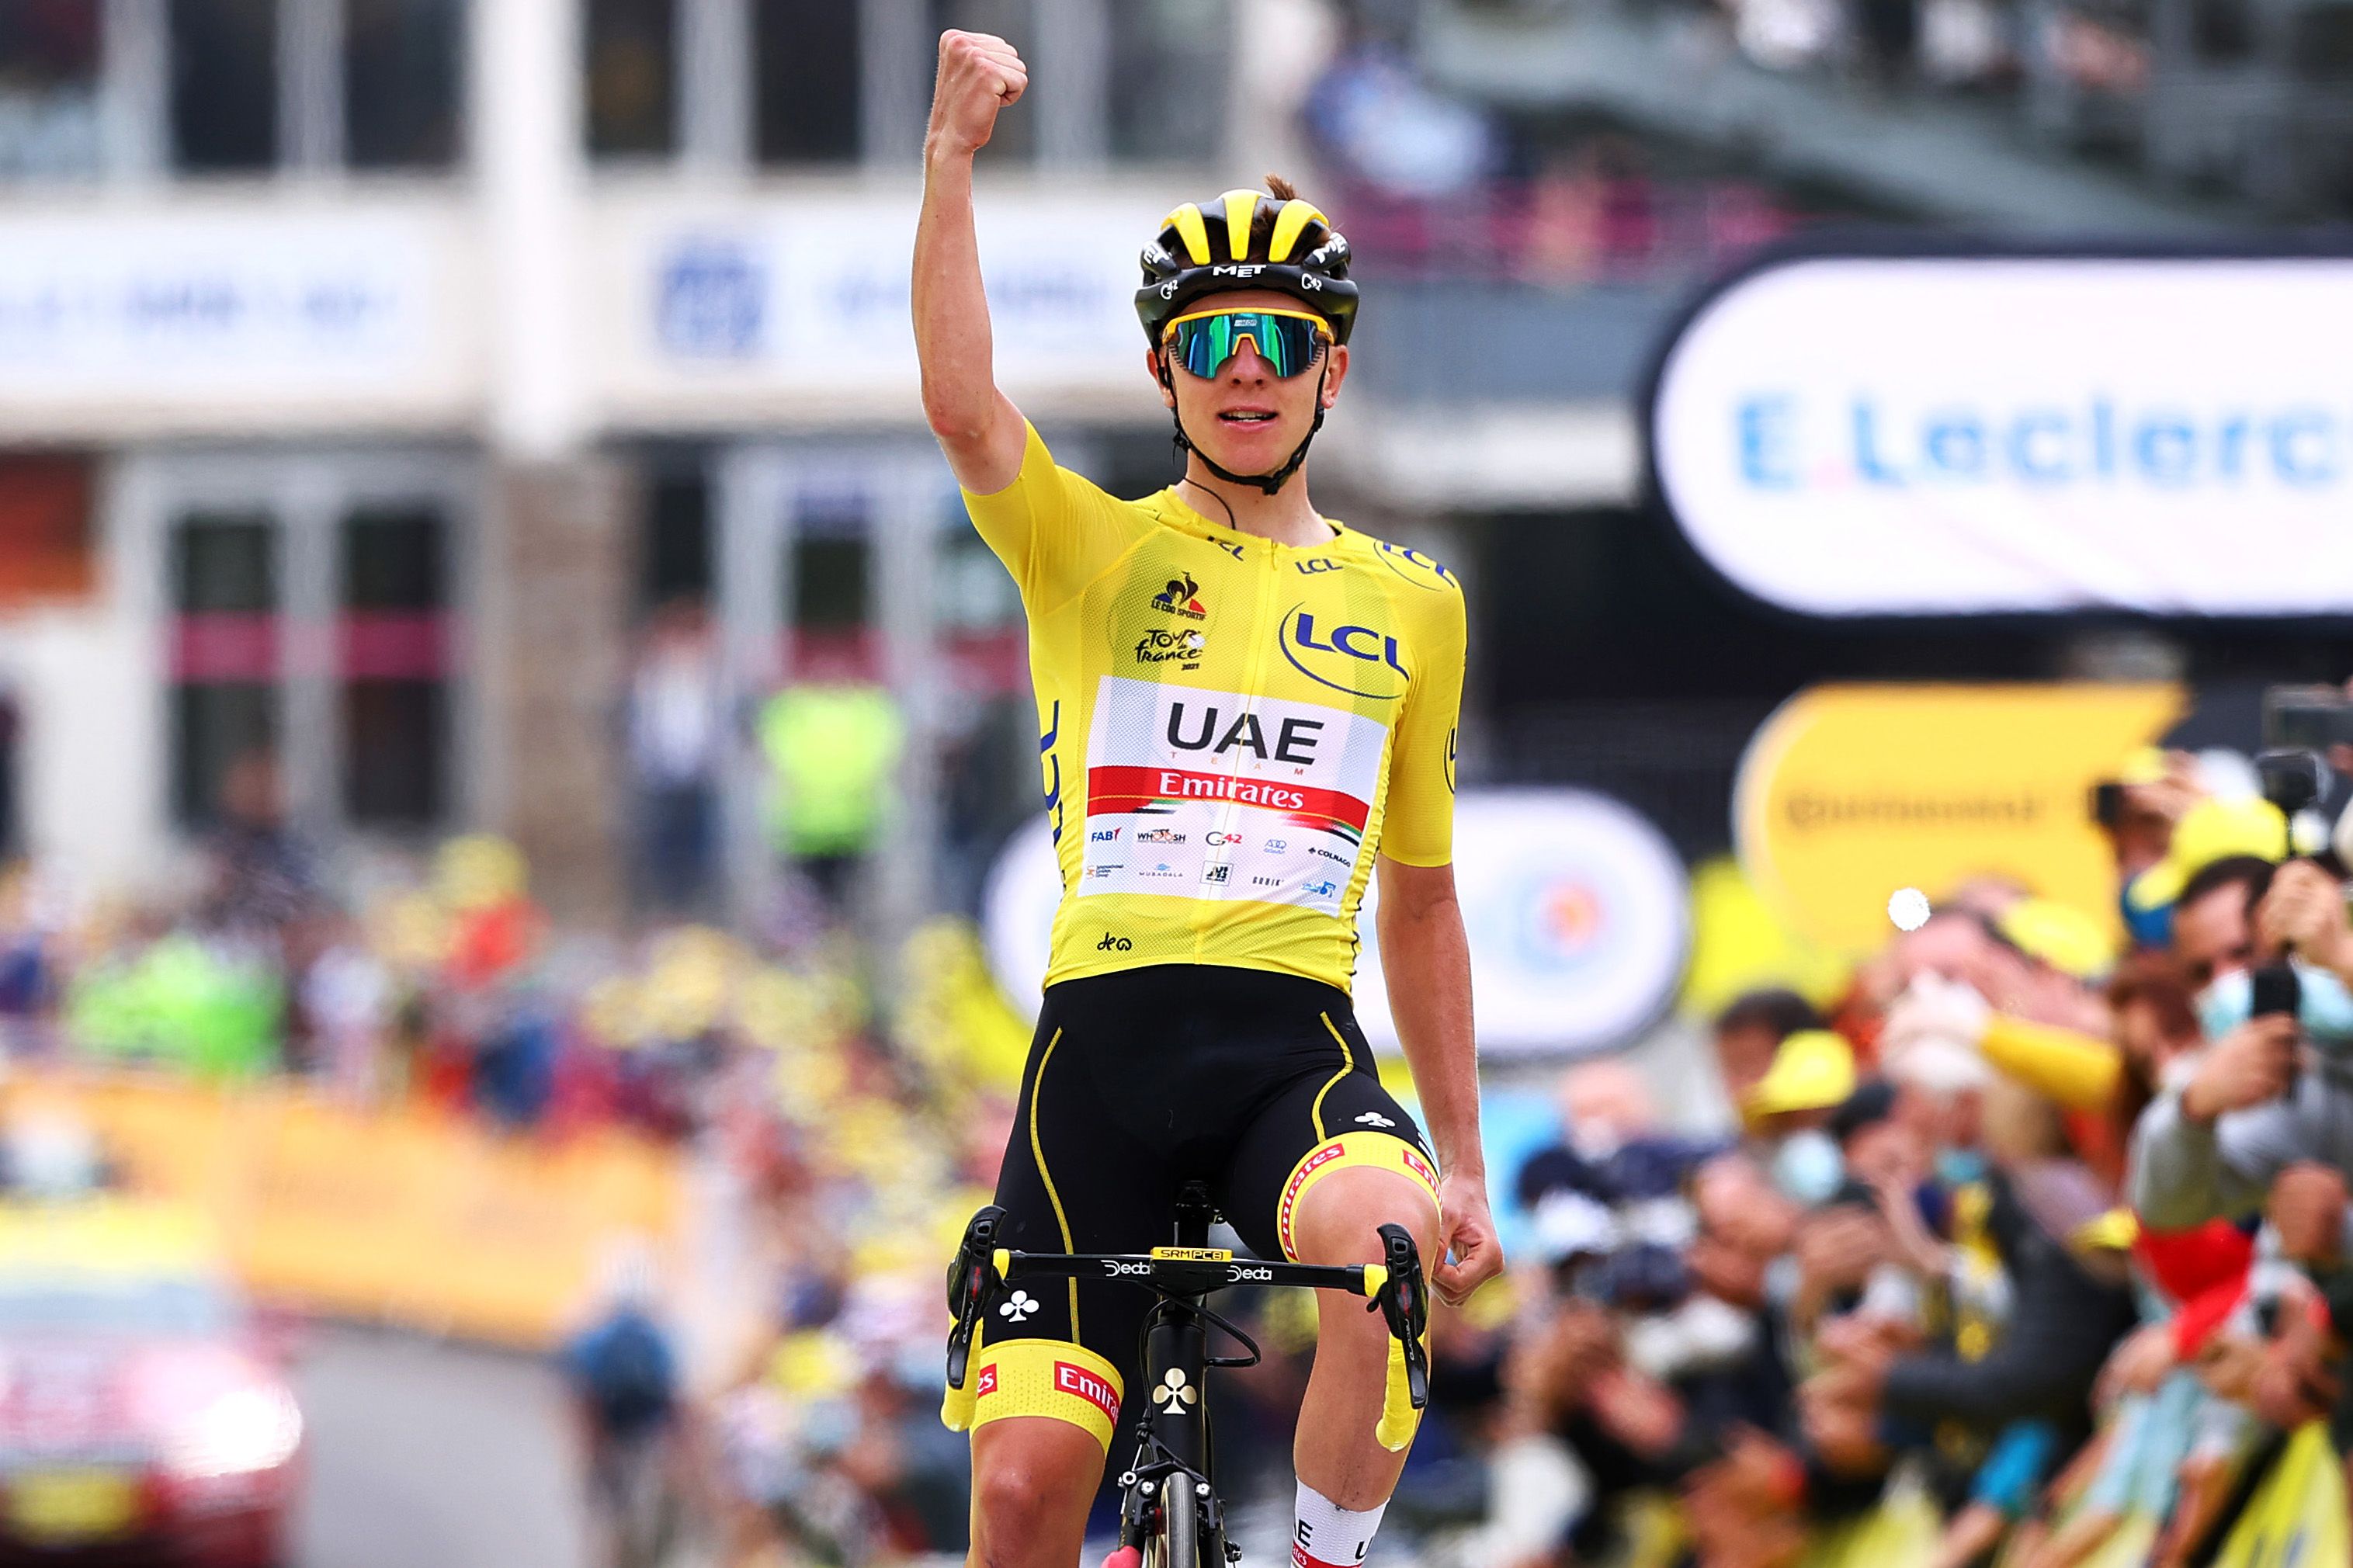 Tour de France 2021: Pogačar climbs to another great victory in Tour de France. SBS Cycling Central